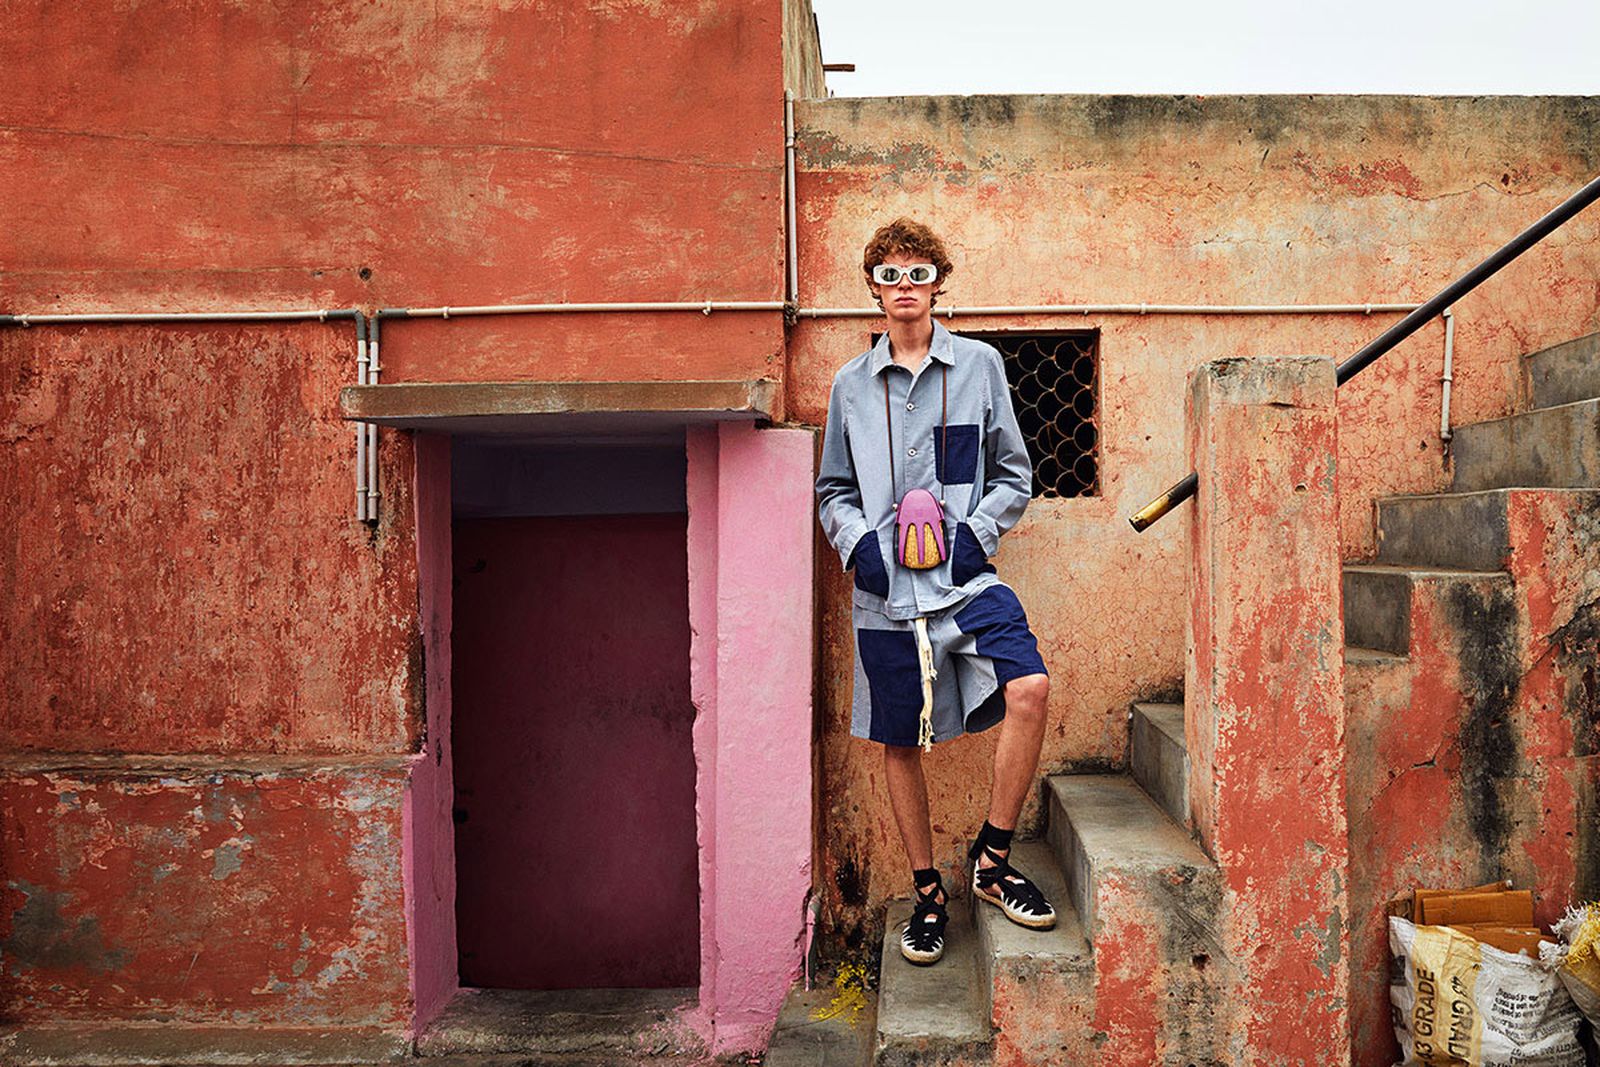 Images from Loewe's SS20 Campaign shot in New Delhi by Gray Sorrenti